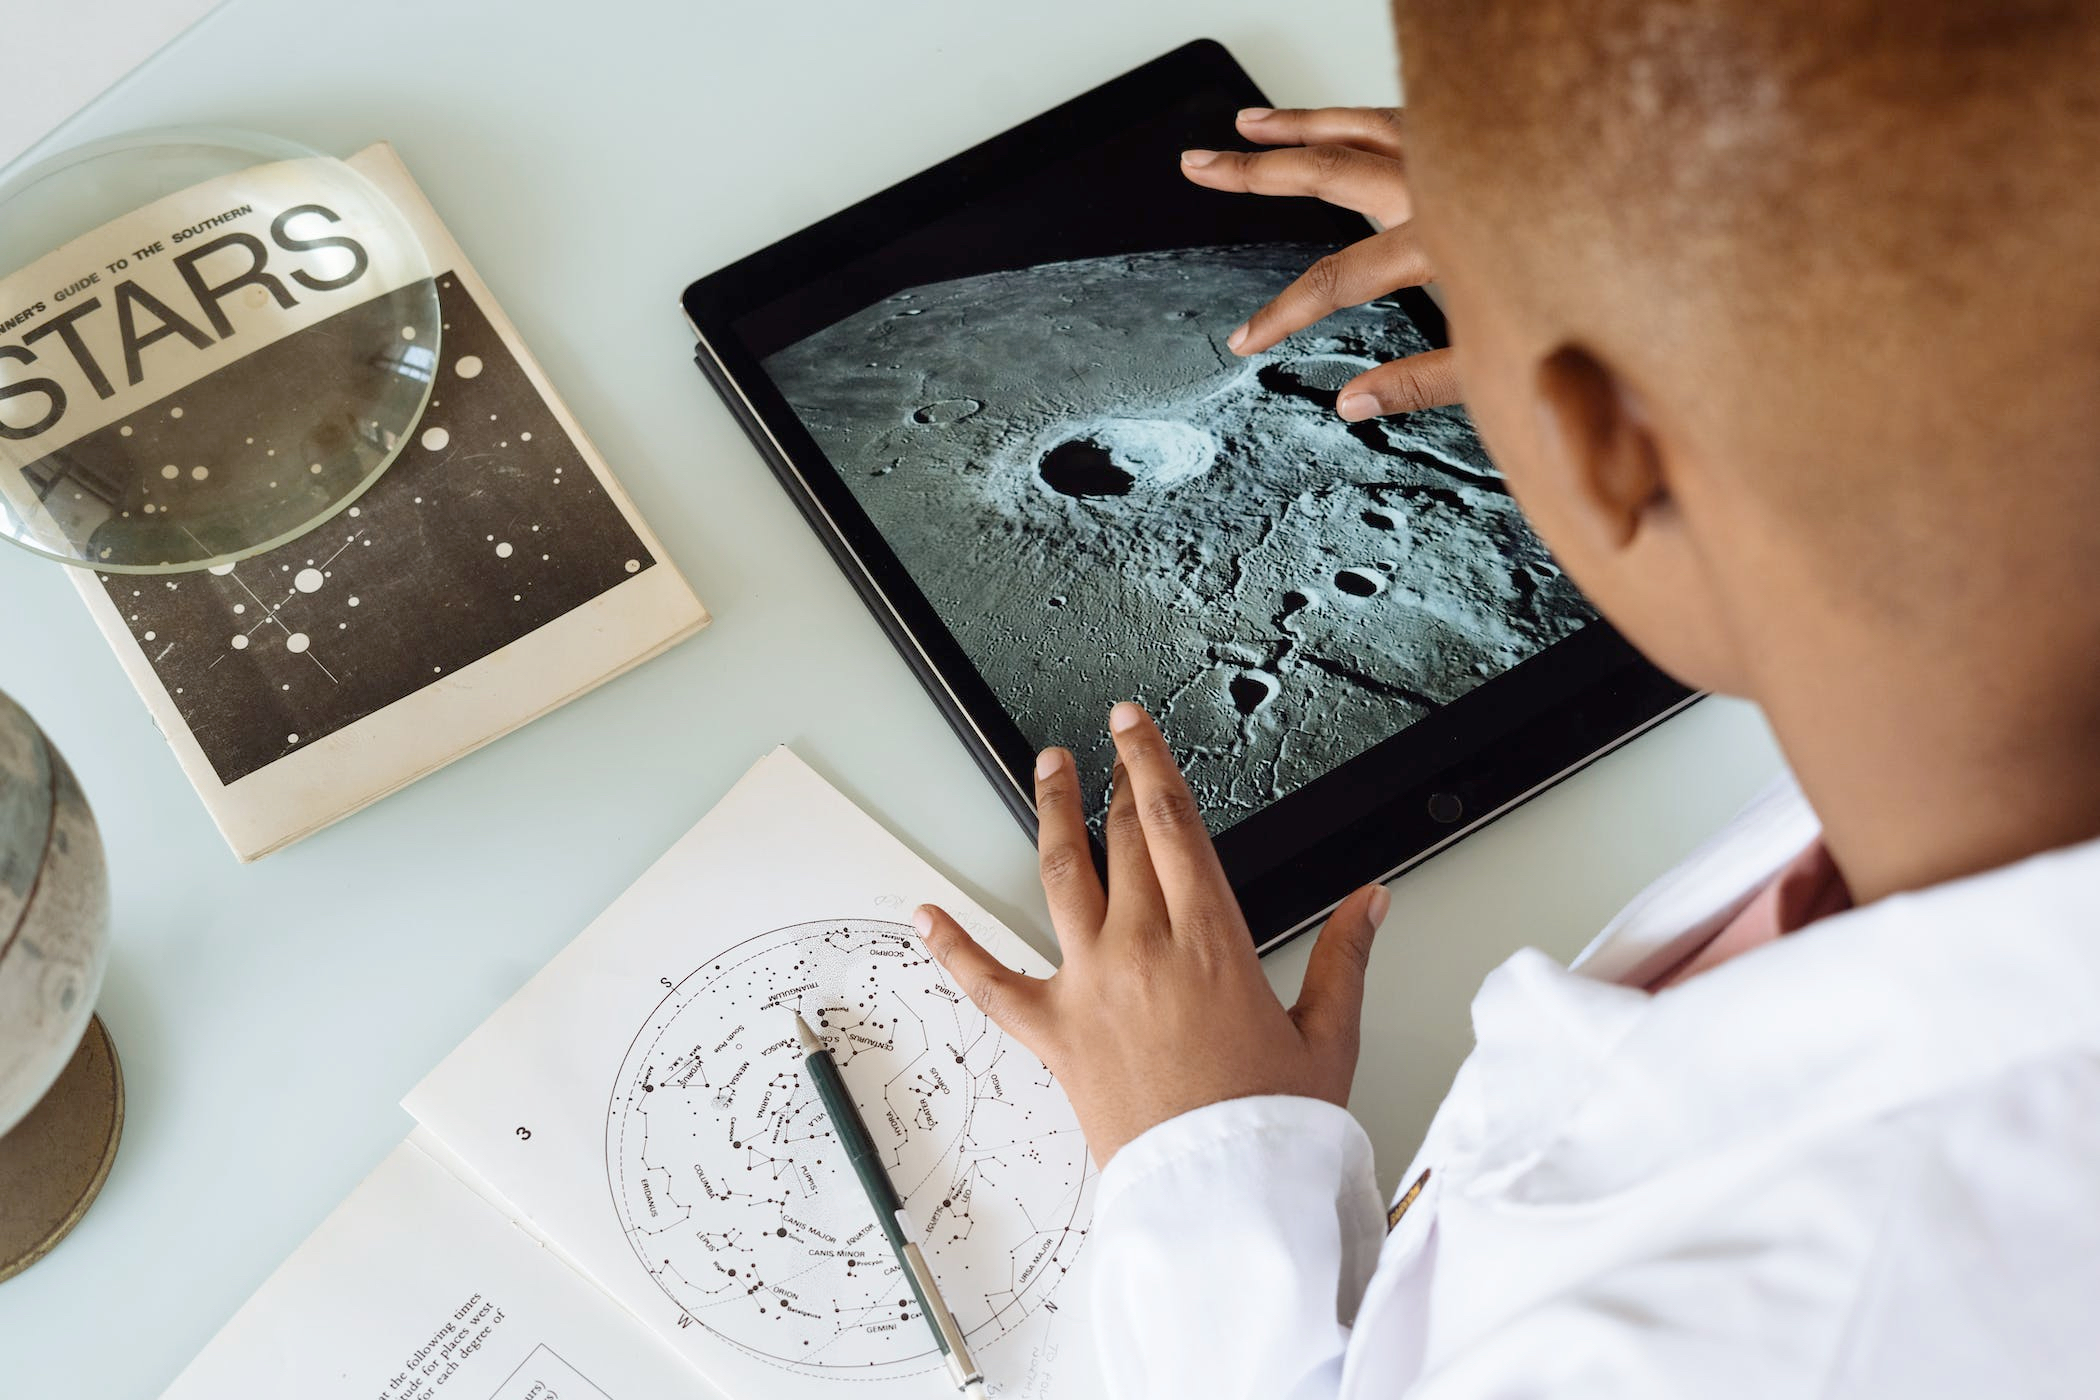 A student studying the craters on the Moon. (Credit: Pexels)